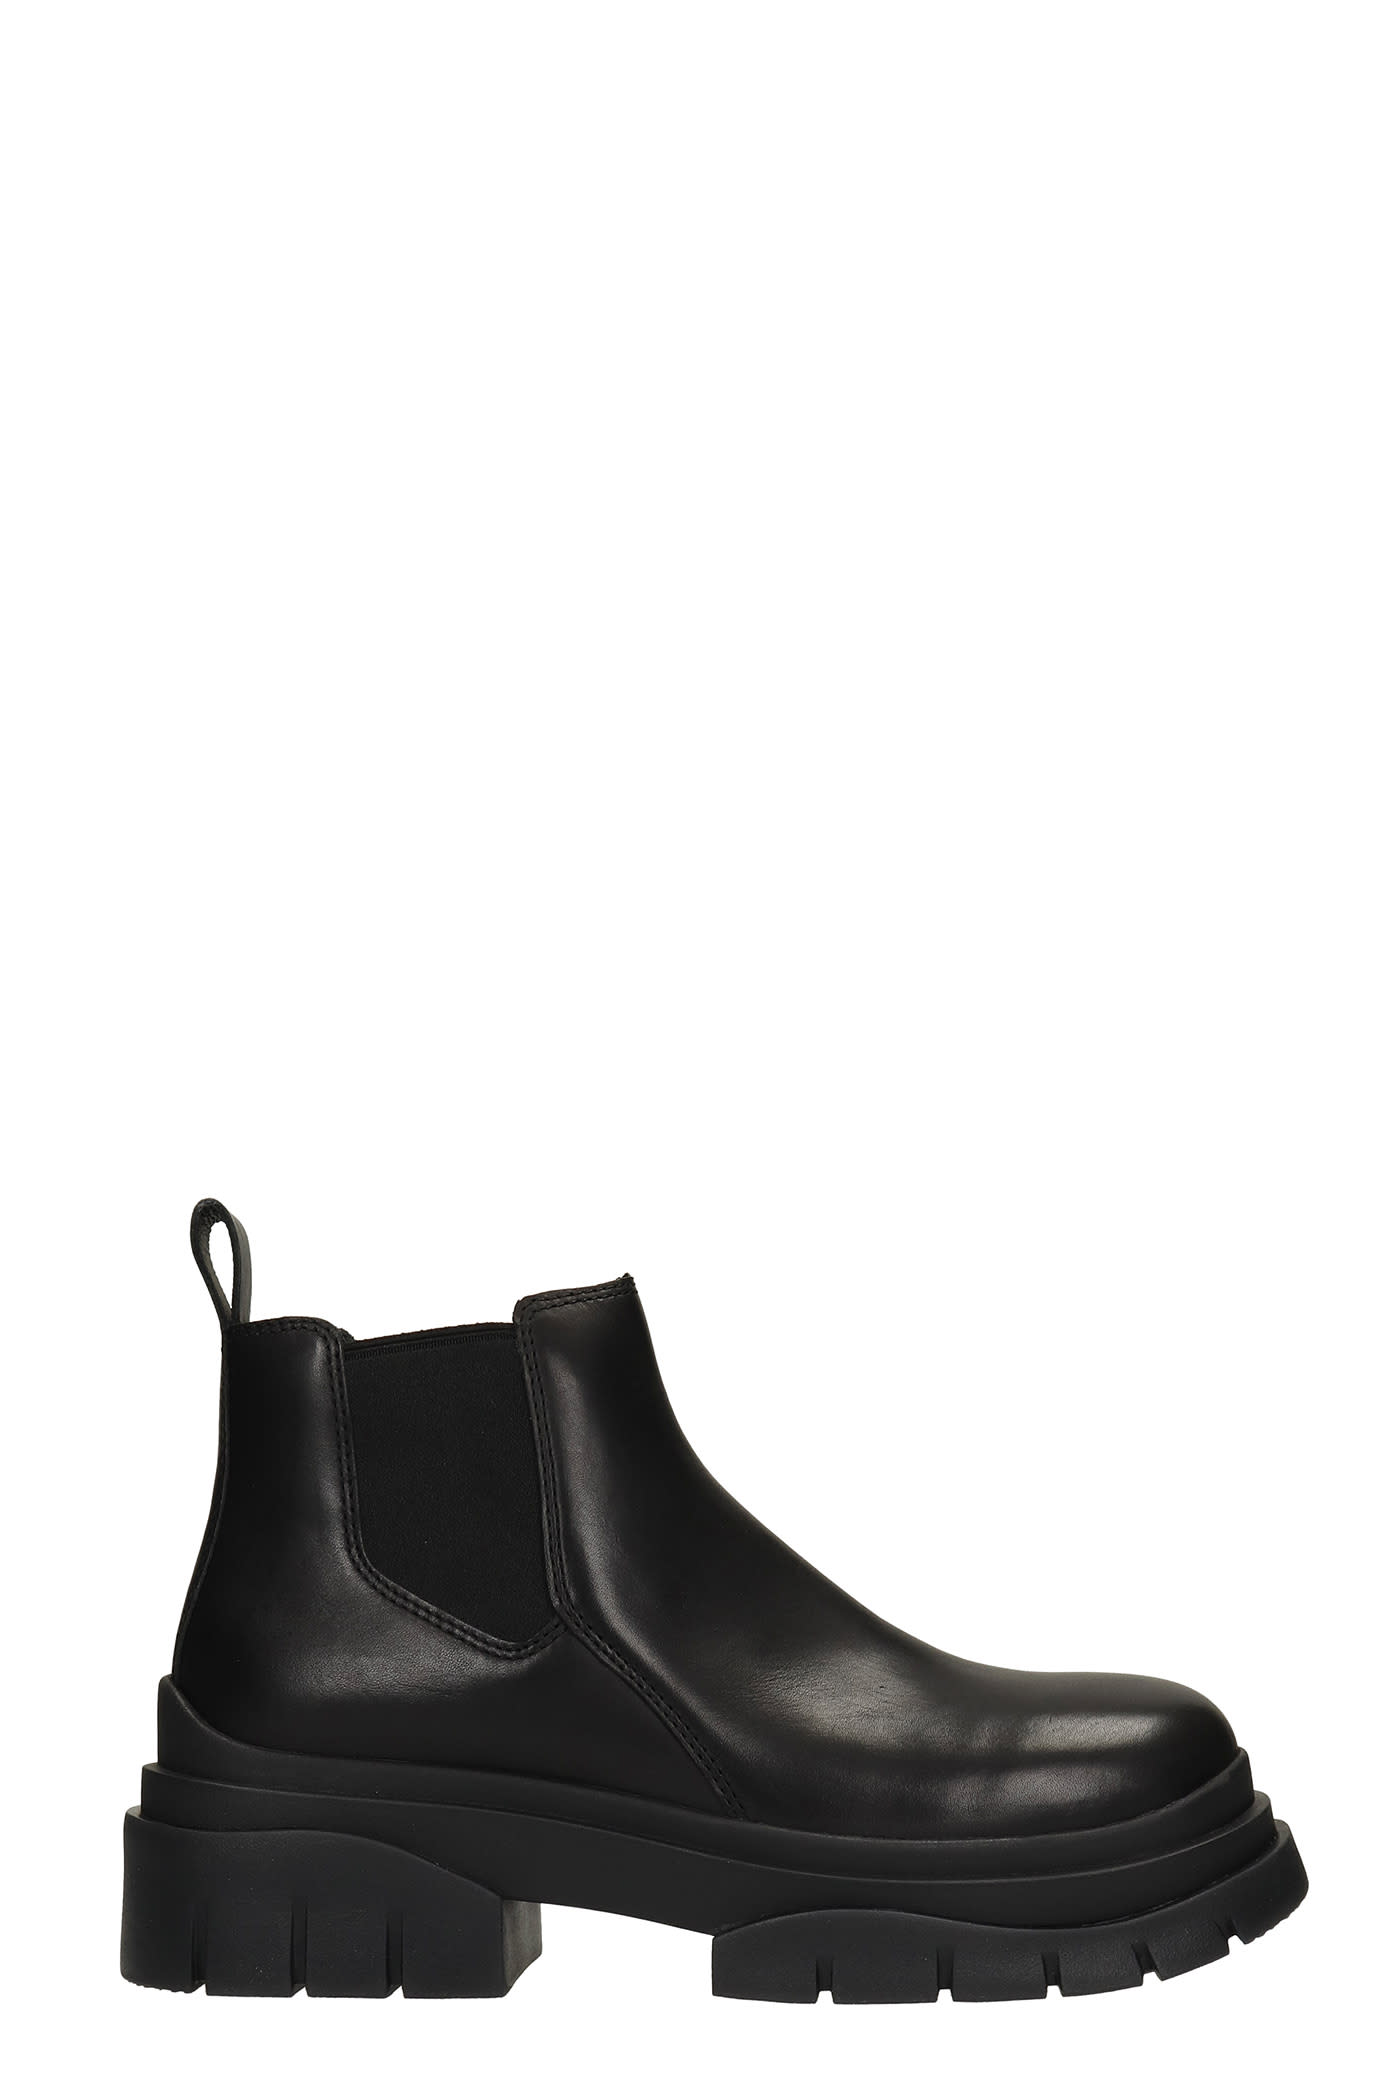 Ash Shadow Low Heels Ankle Boots In Black Leather